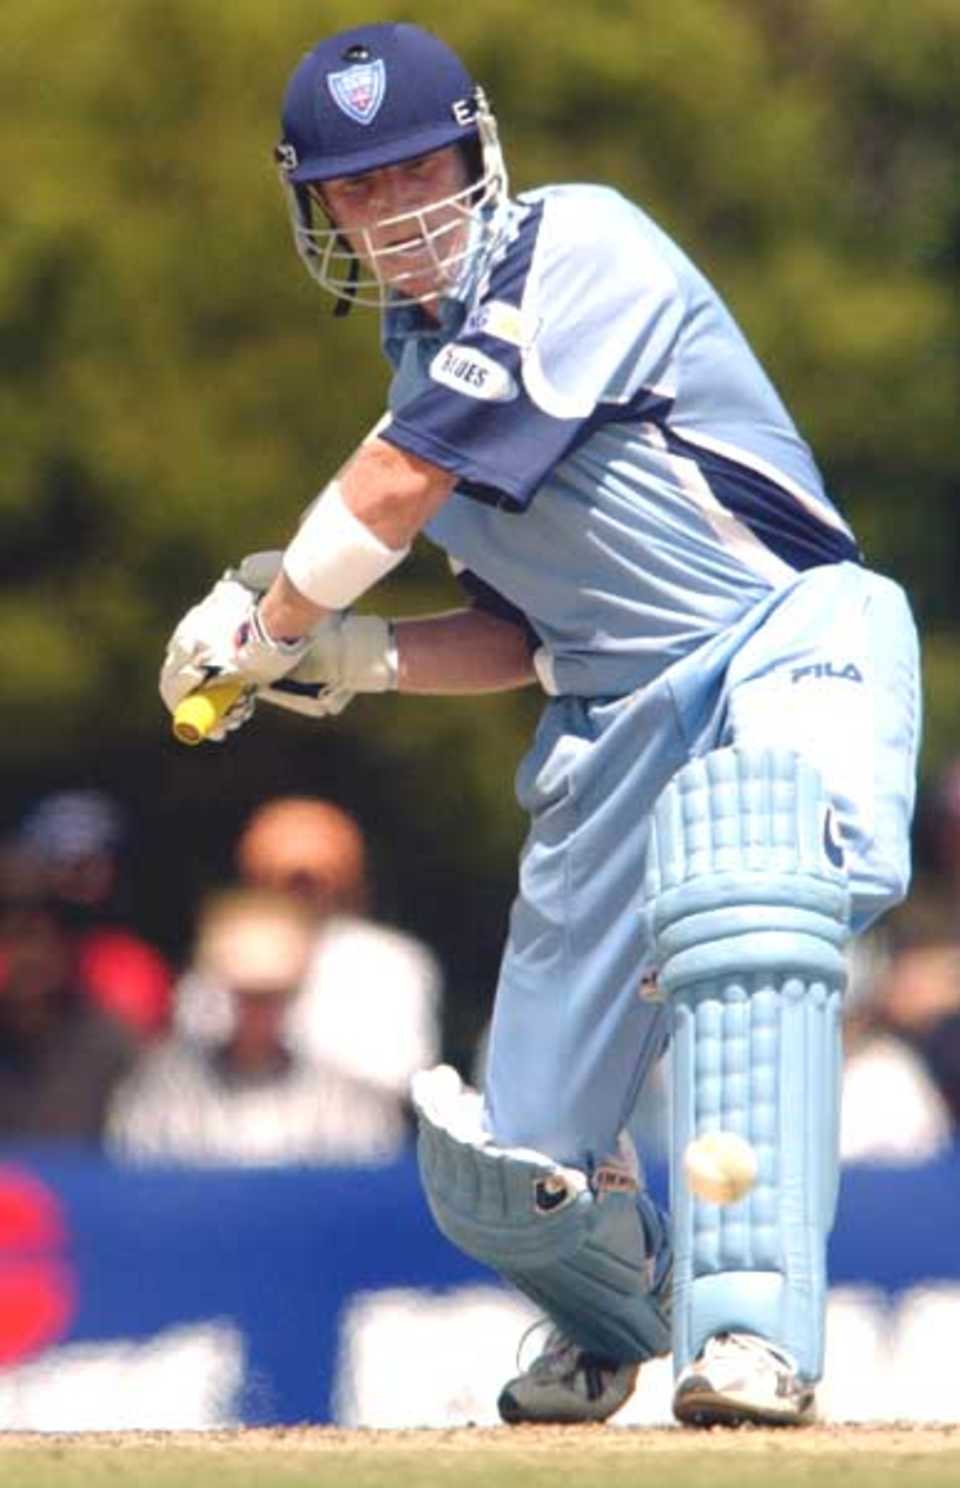 14 Oct 2001: Brad Haddin #24 of the Blues lines up a ball which went for six runs during the ING One Day cricket match between the New South Wales Blues and the Tasmanian Tigers held at Bankstown Oval, Sydney, Australia.